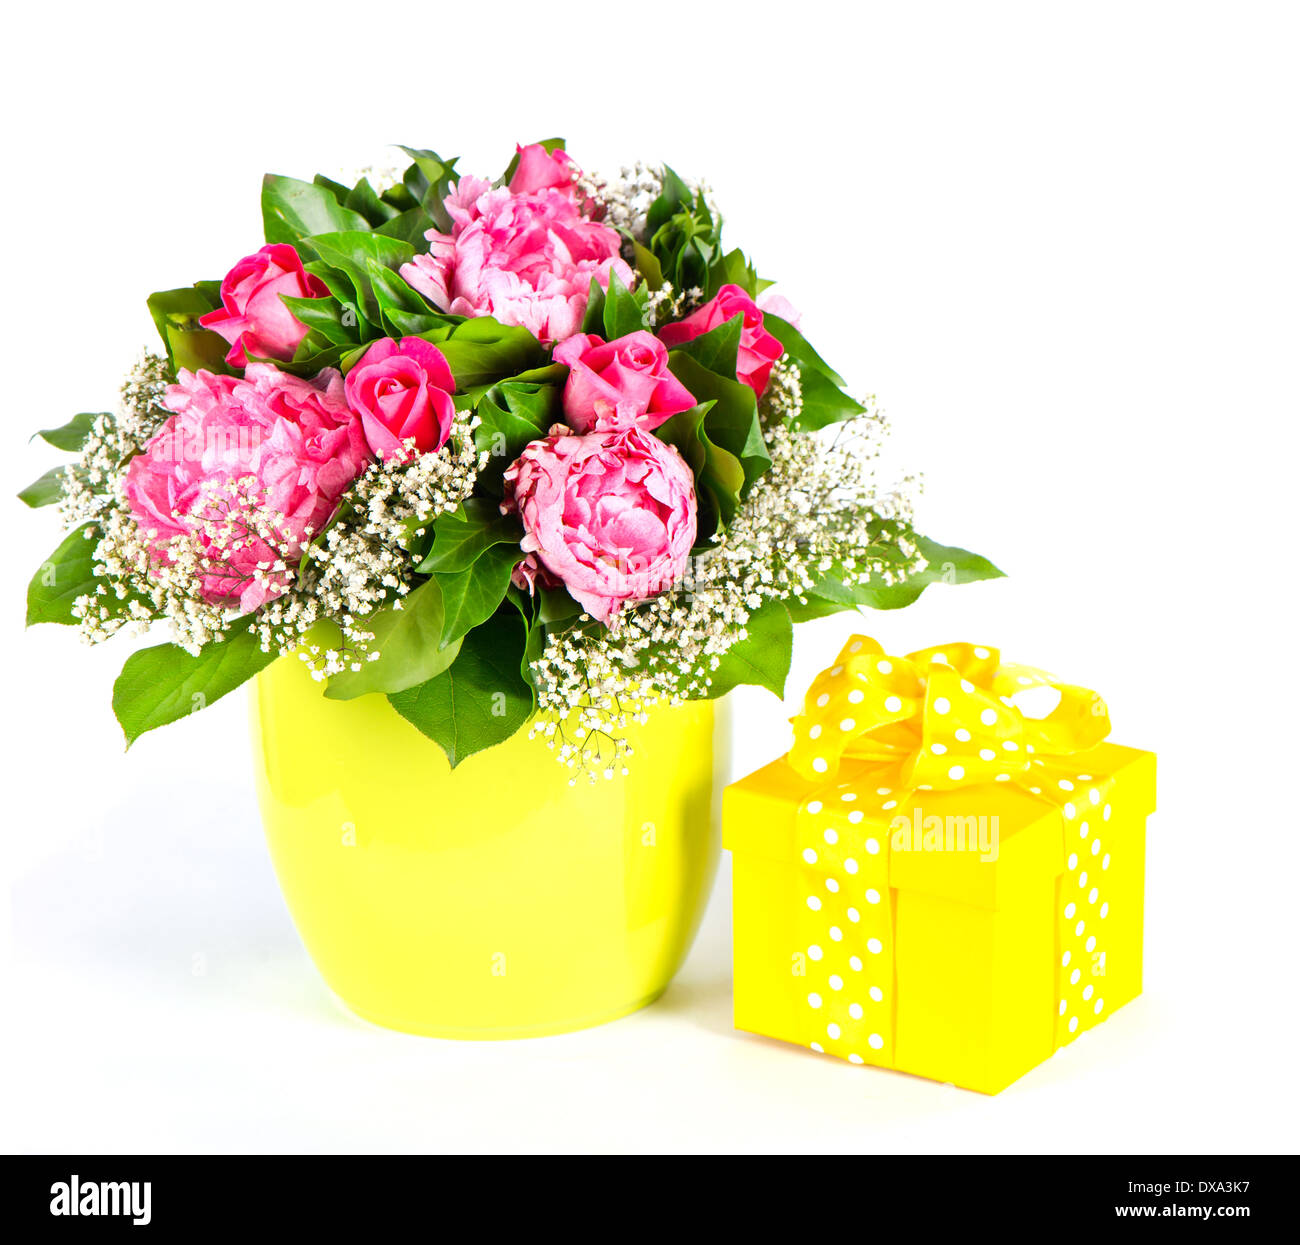 colorful flowers bouquet with gift box Stock Photo